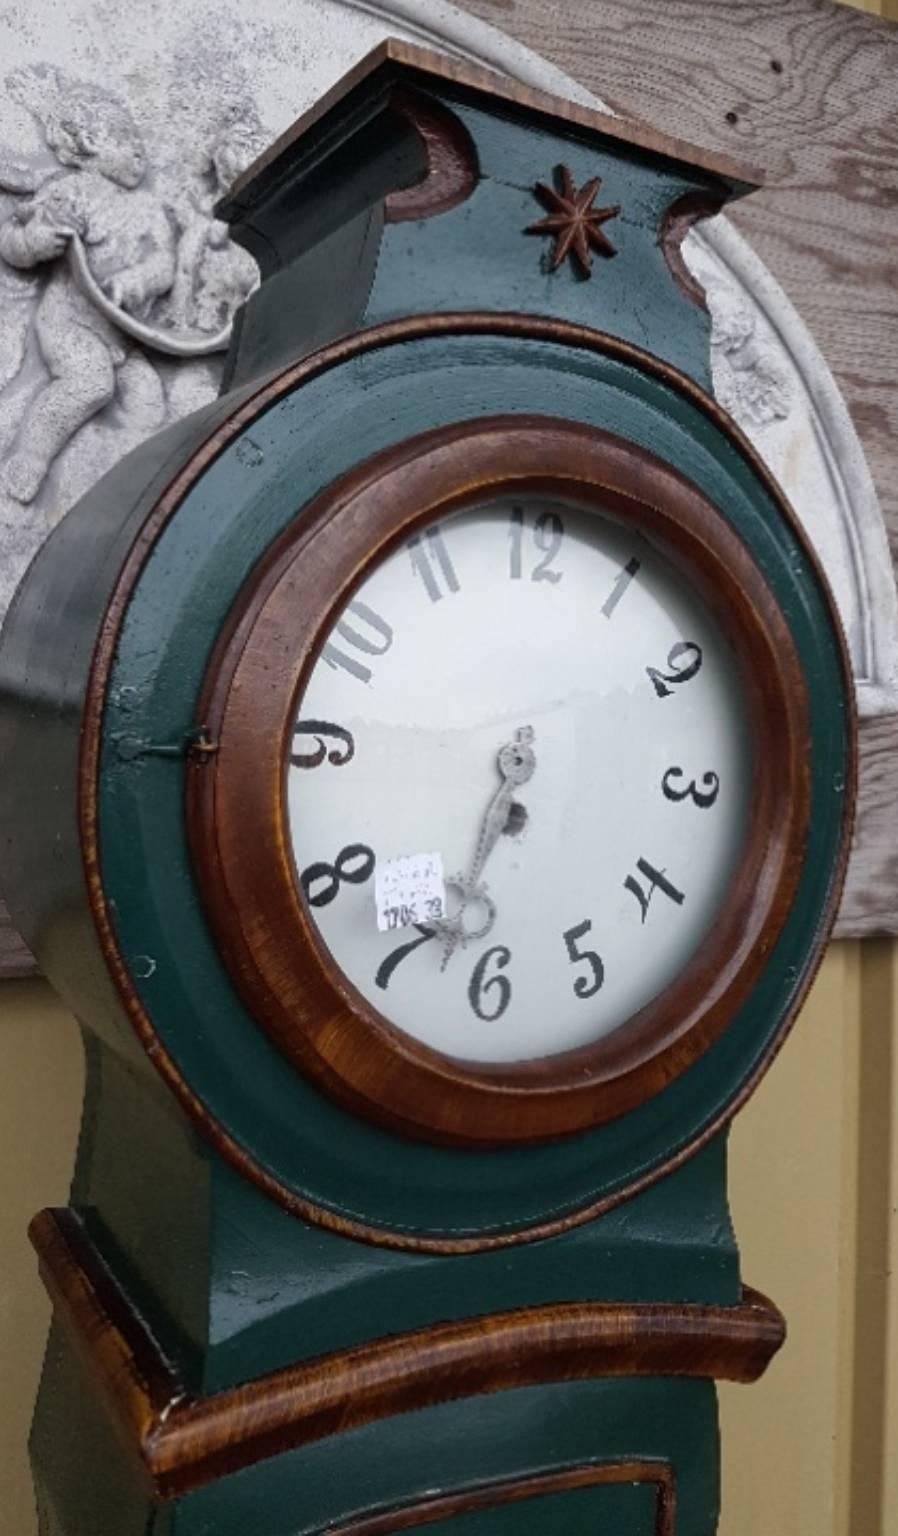 Unusual example of a decorative 1800s antique Swedish mora clock with stunning hand-painted detailing to the body and plinth with the rare flower carving and star motif on the hood.

This original 1800s mora clock has a beautiful face with a clean